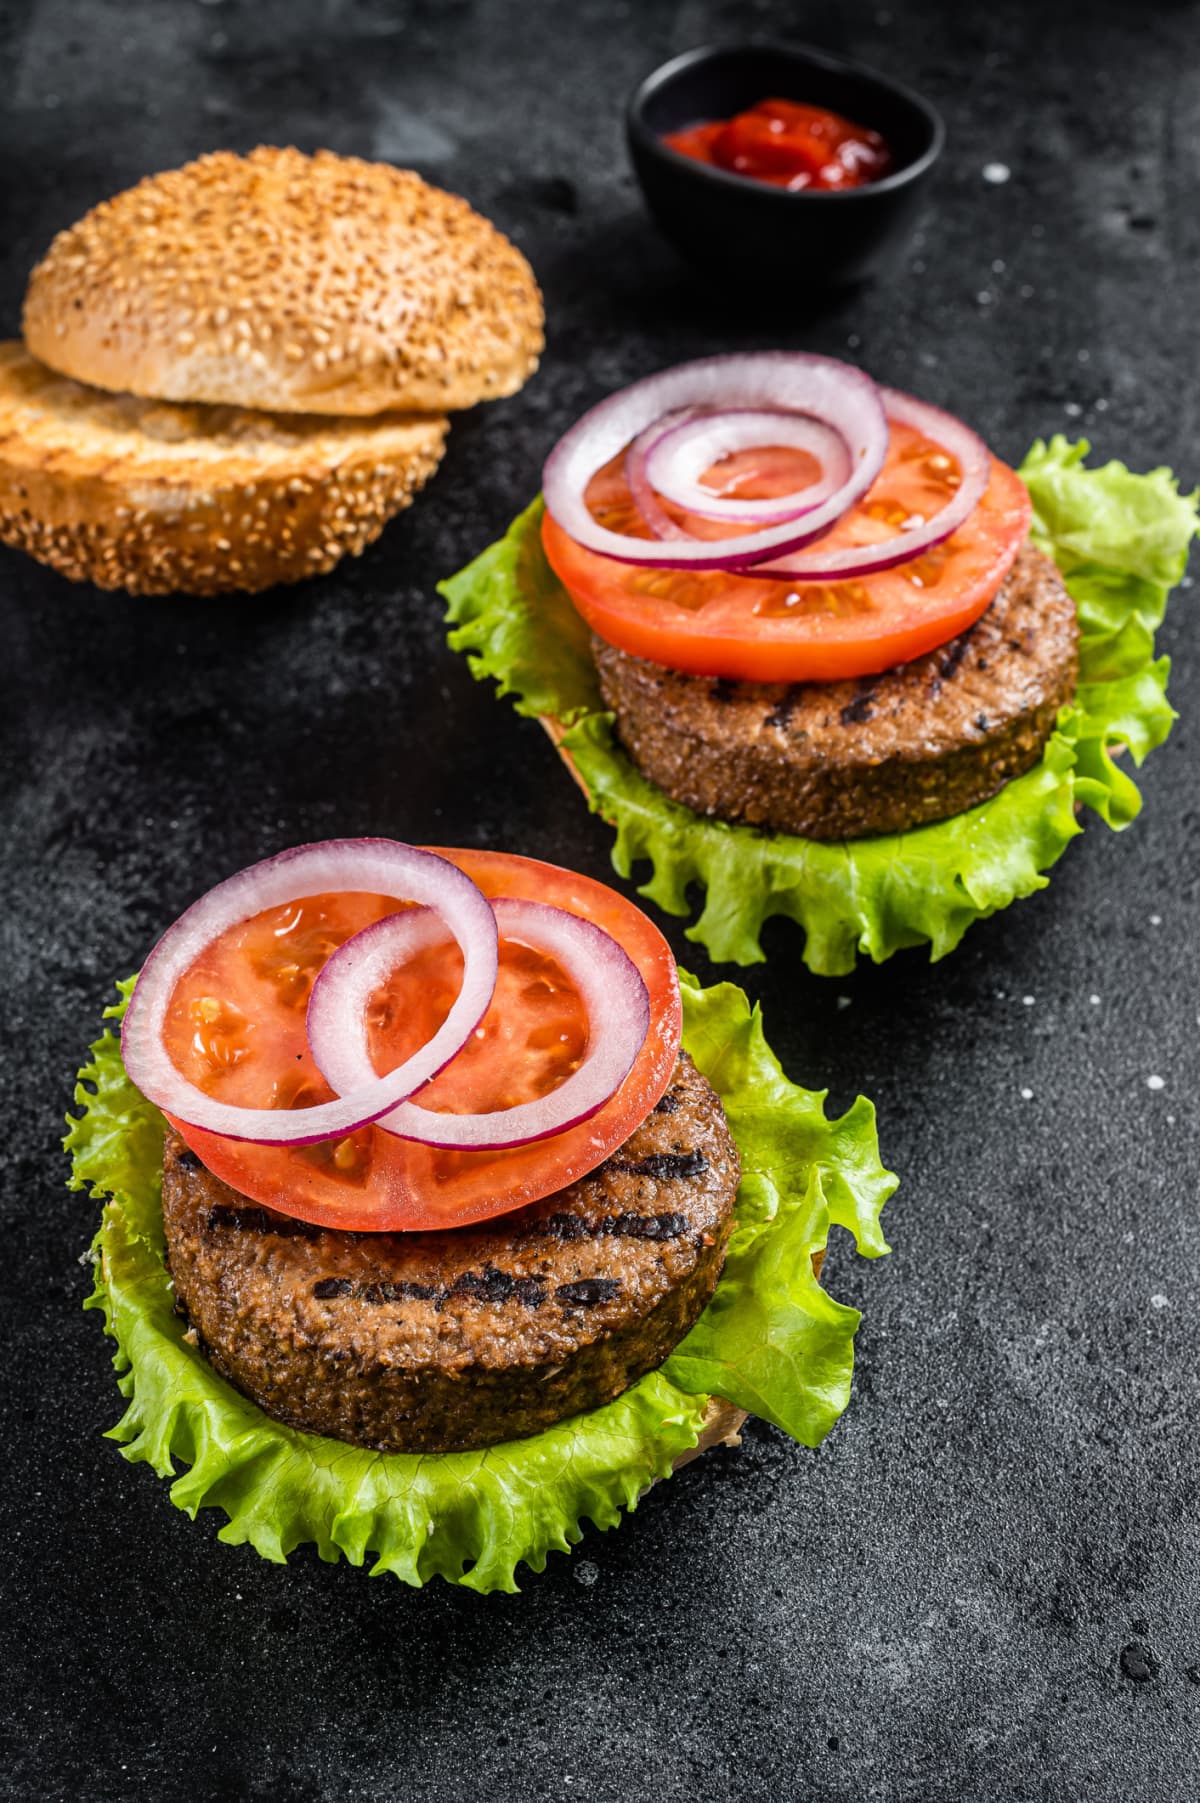 Vegan burgers with onion, tomato, and lettuce